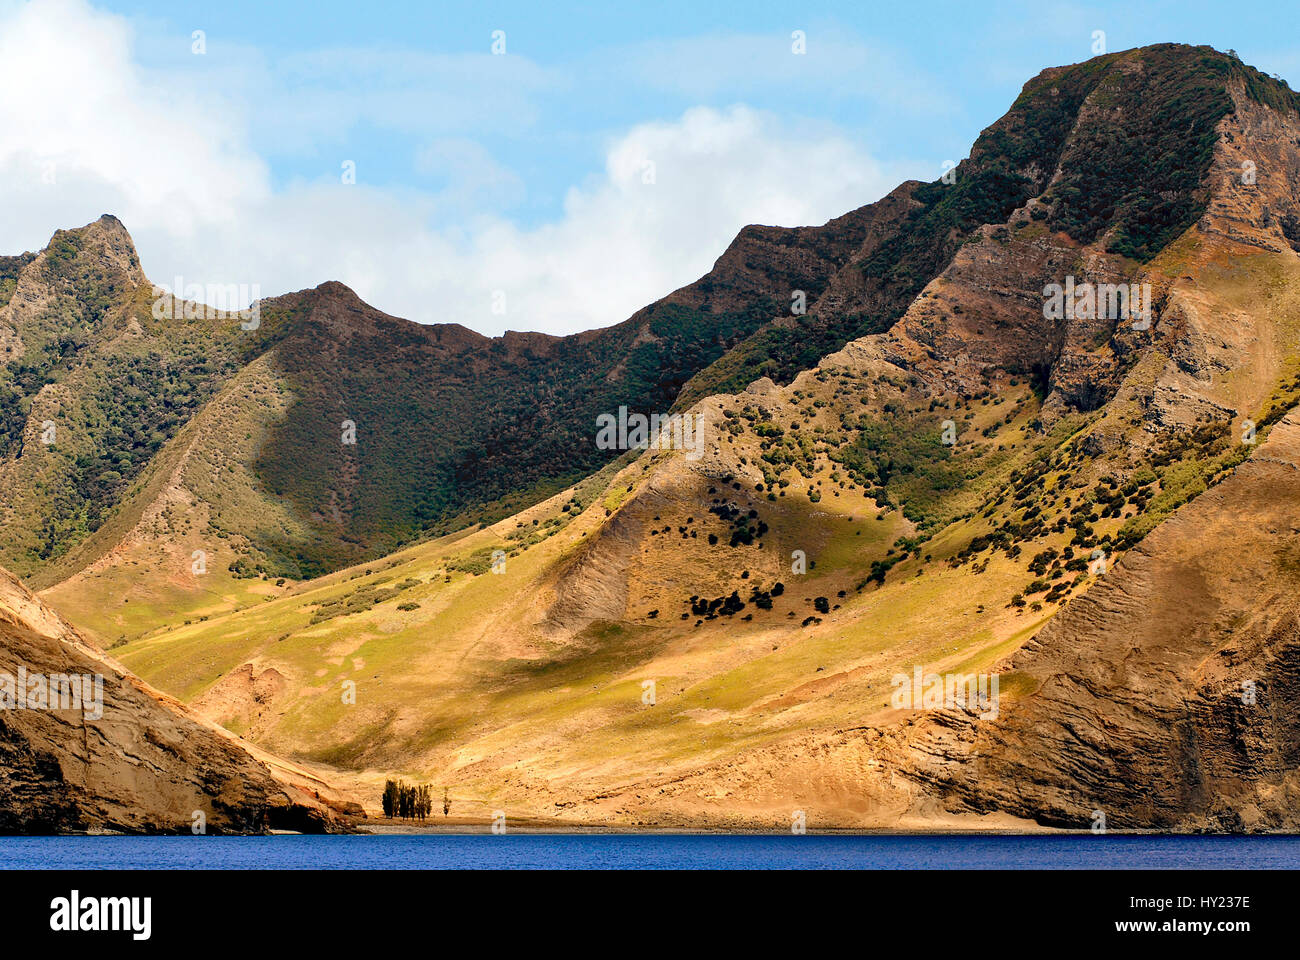 Image of the Coastline of Robinson Crusoe Island formerly known as Juan Fernandez, Chile. Stock Photo